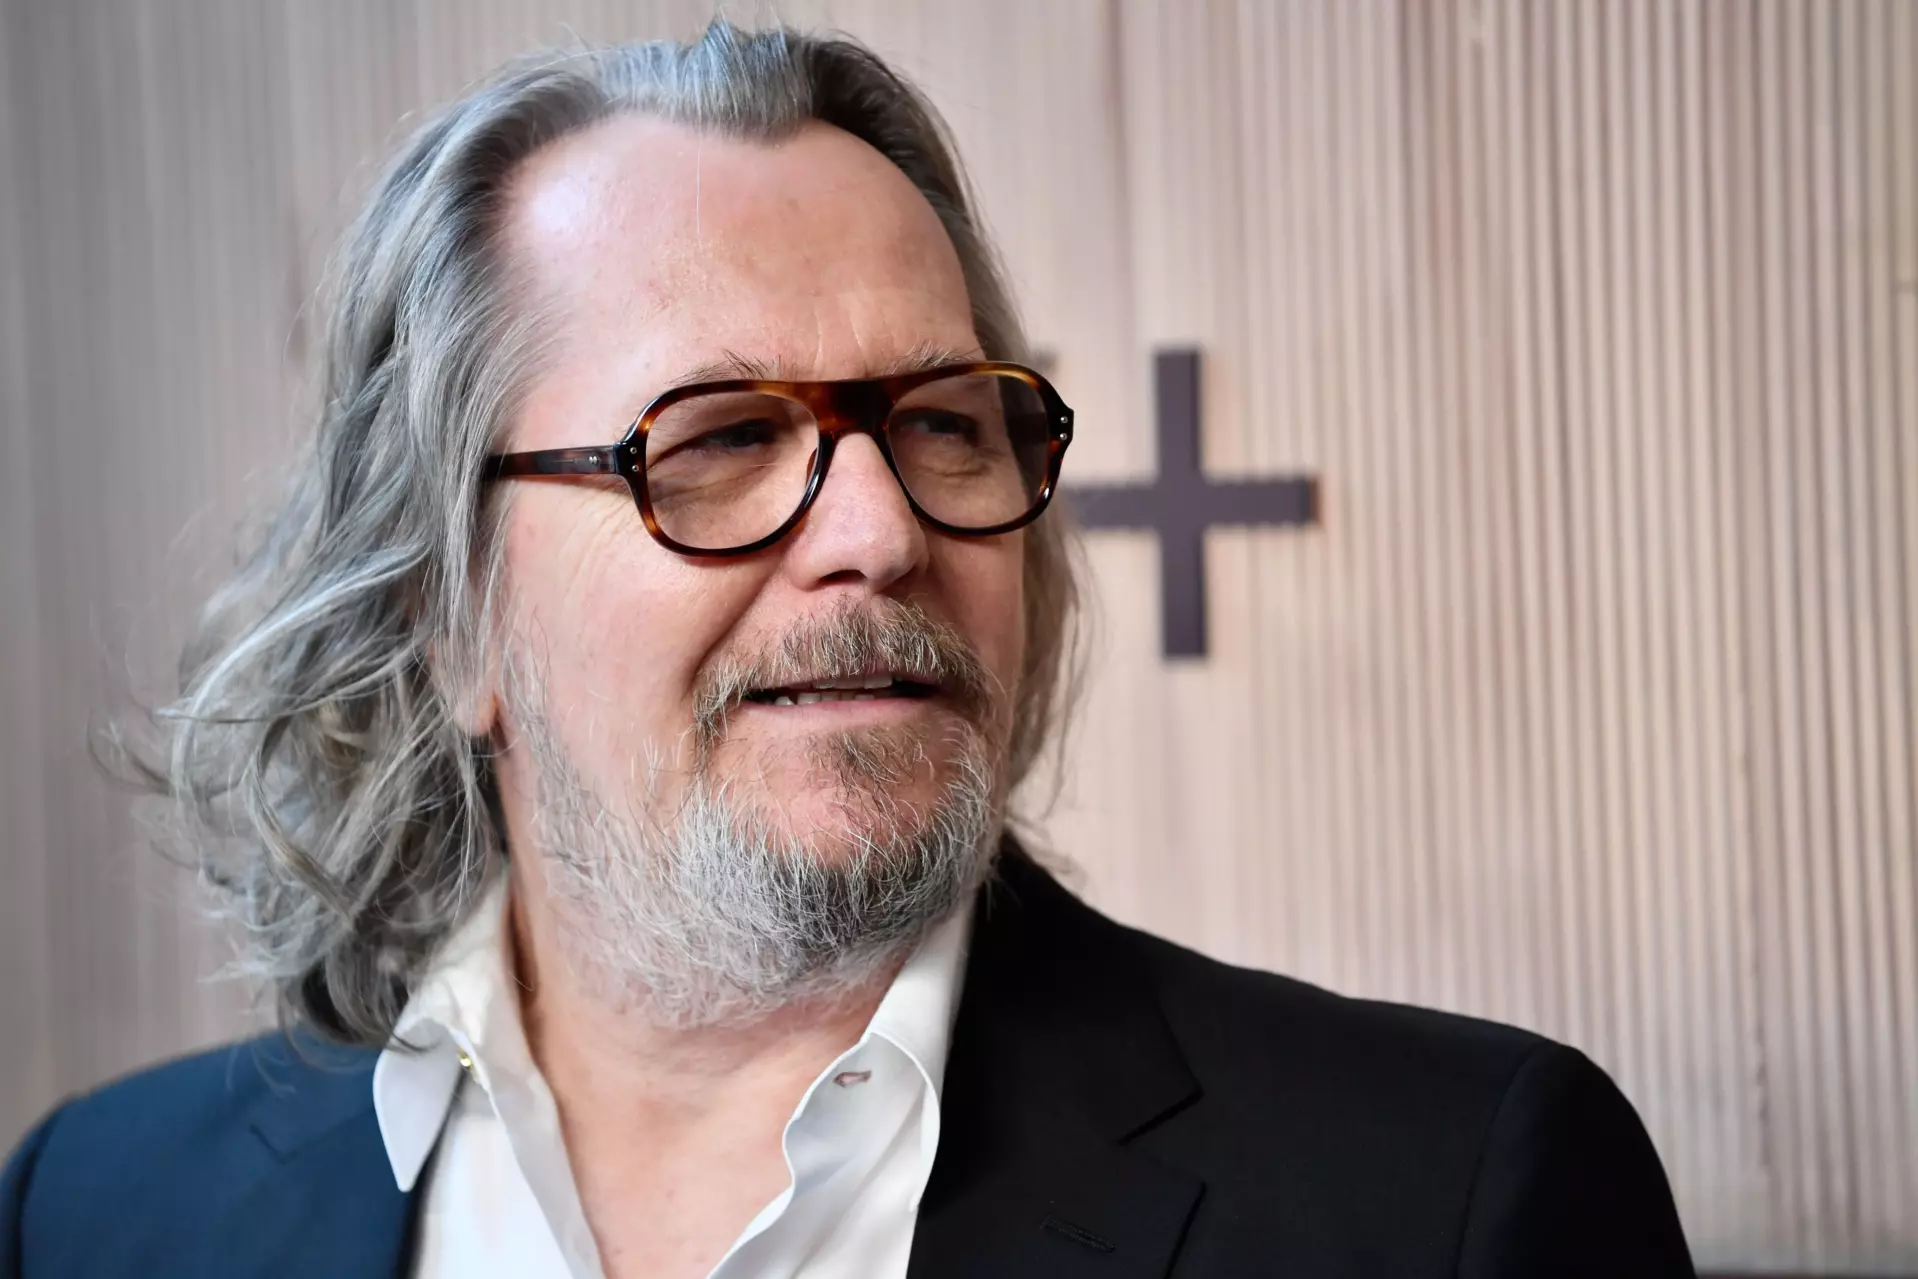 How rich is Gary Oldman?